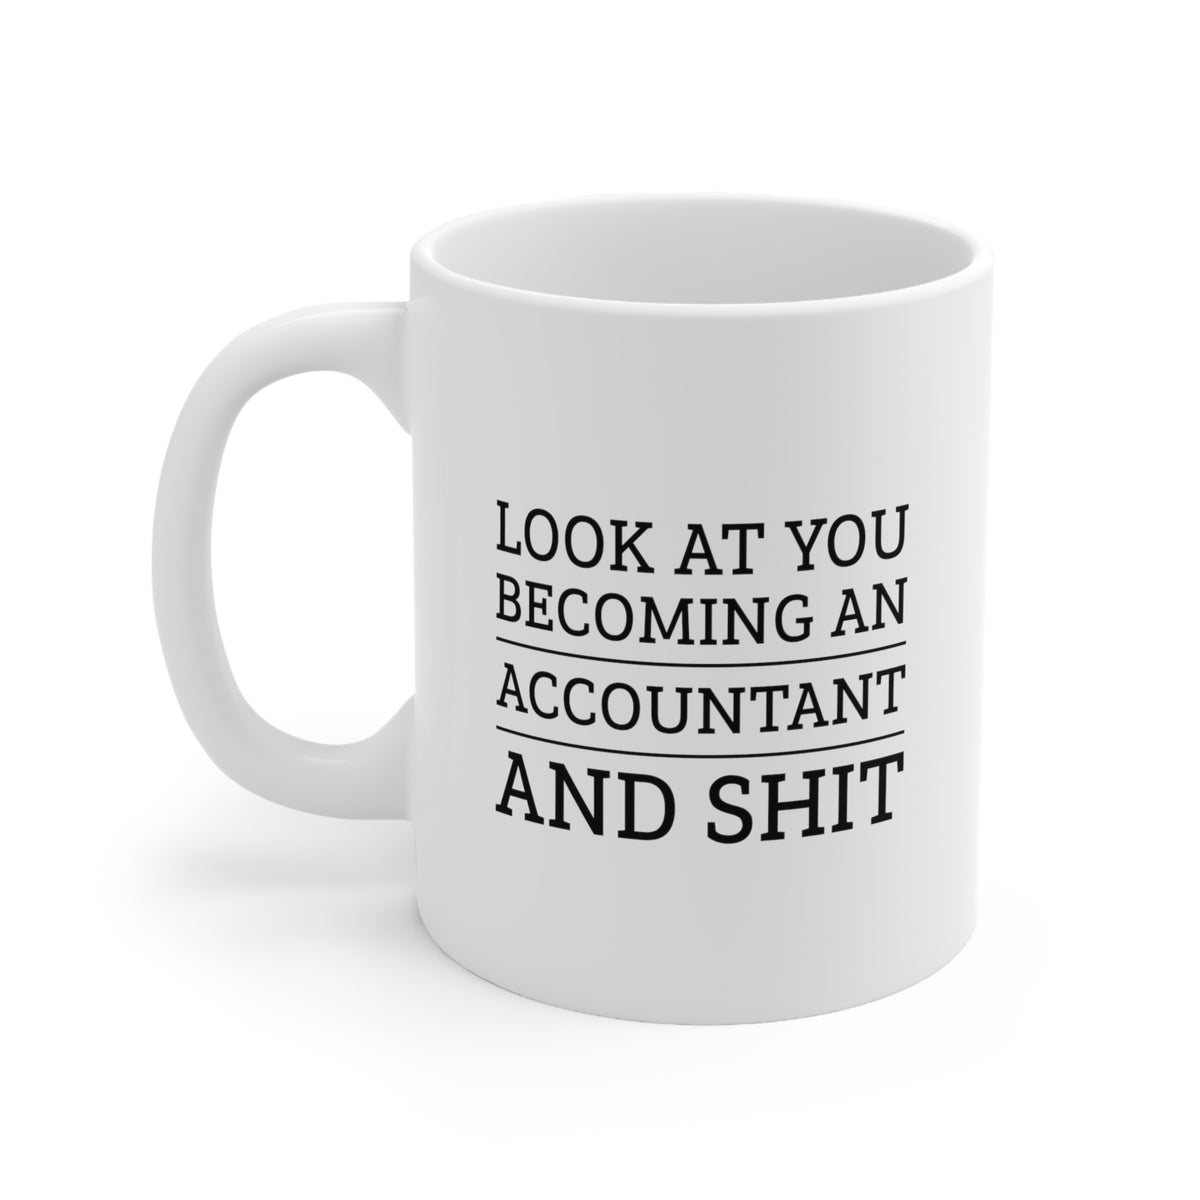 Accountant Coffee Mug - Look at you becoming an Accountant and shit Cup - Funny Tax Accounting Gifts and Sarcasm